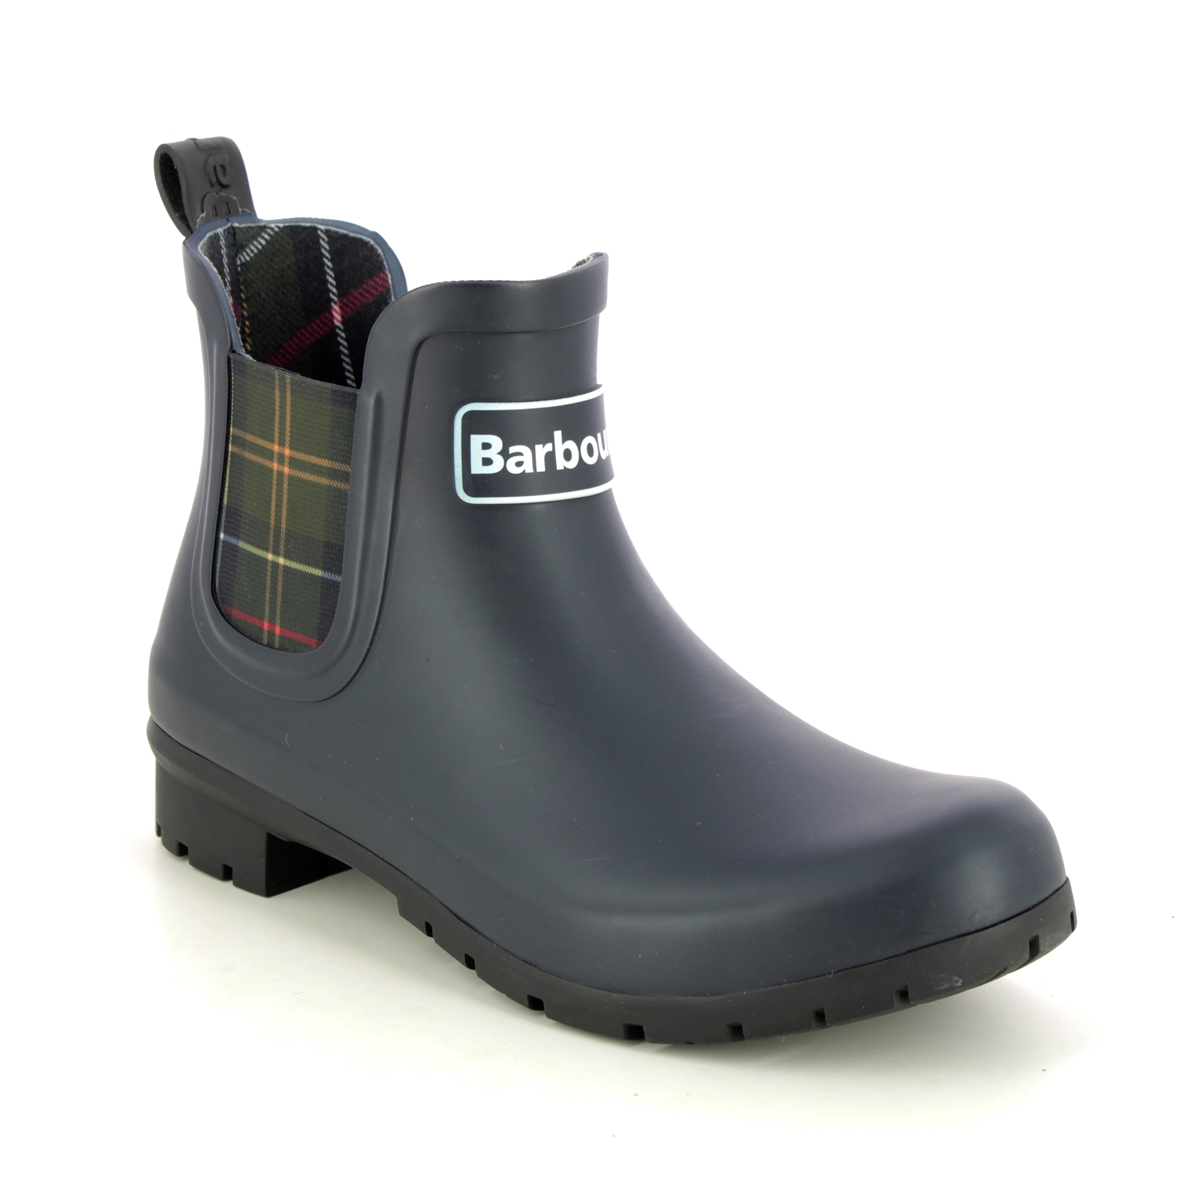 Barbour Kingham Wellie Navy Boots Lrf0088-Ny11 In Size 6 In Plain Navy